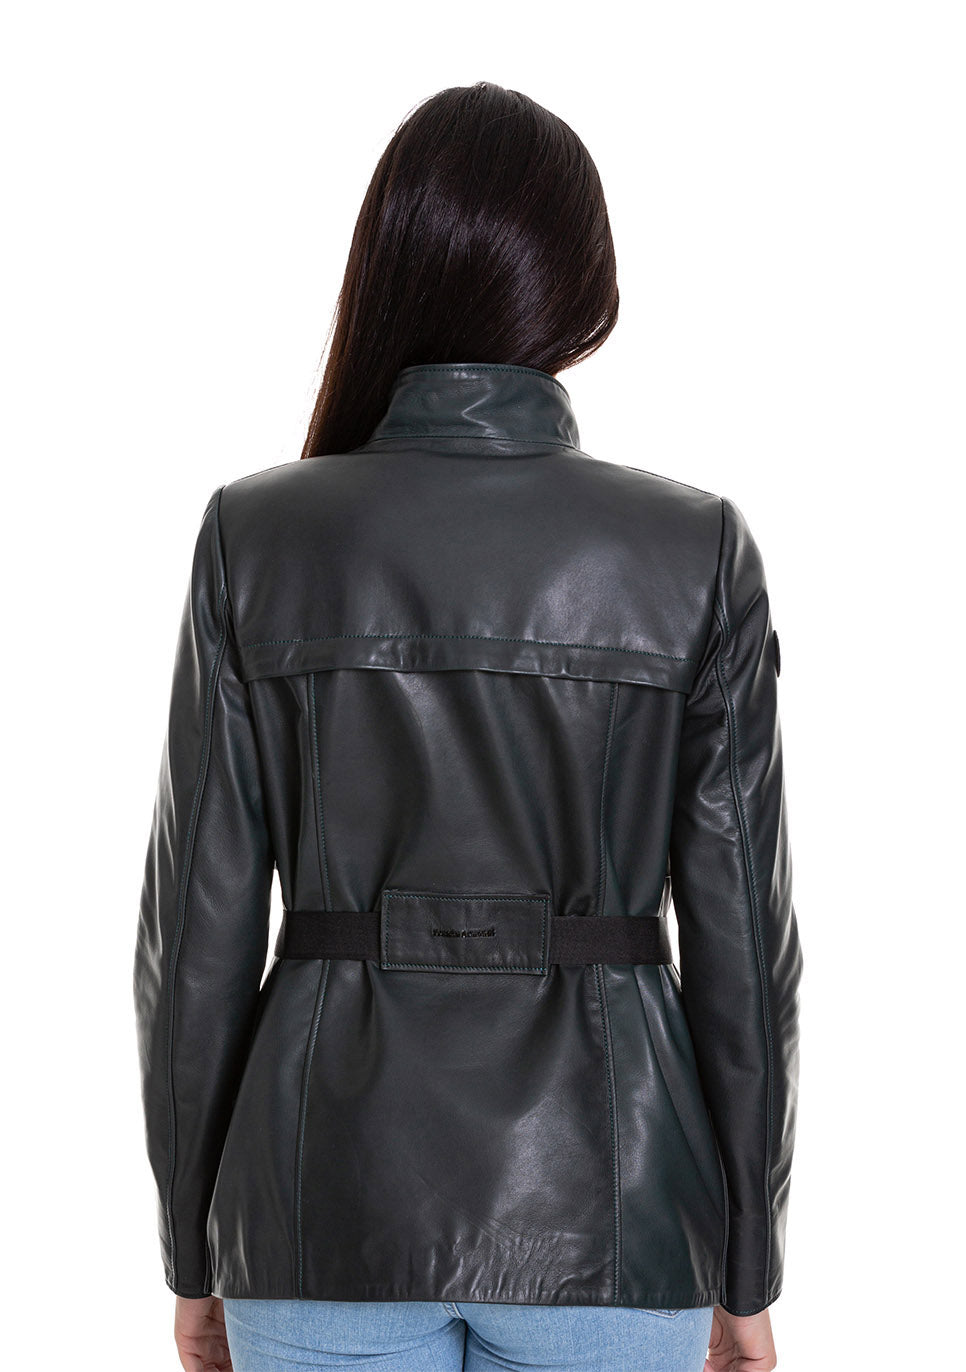 The Luque Women Leather Jacket